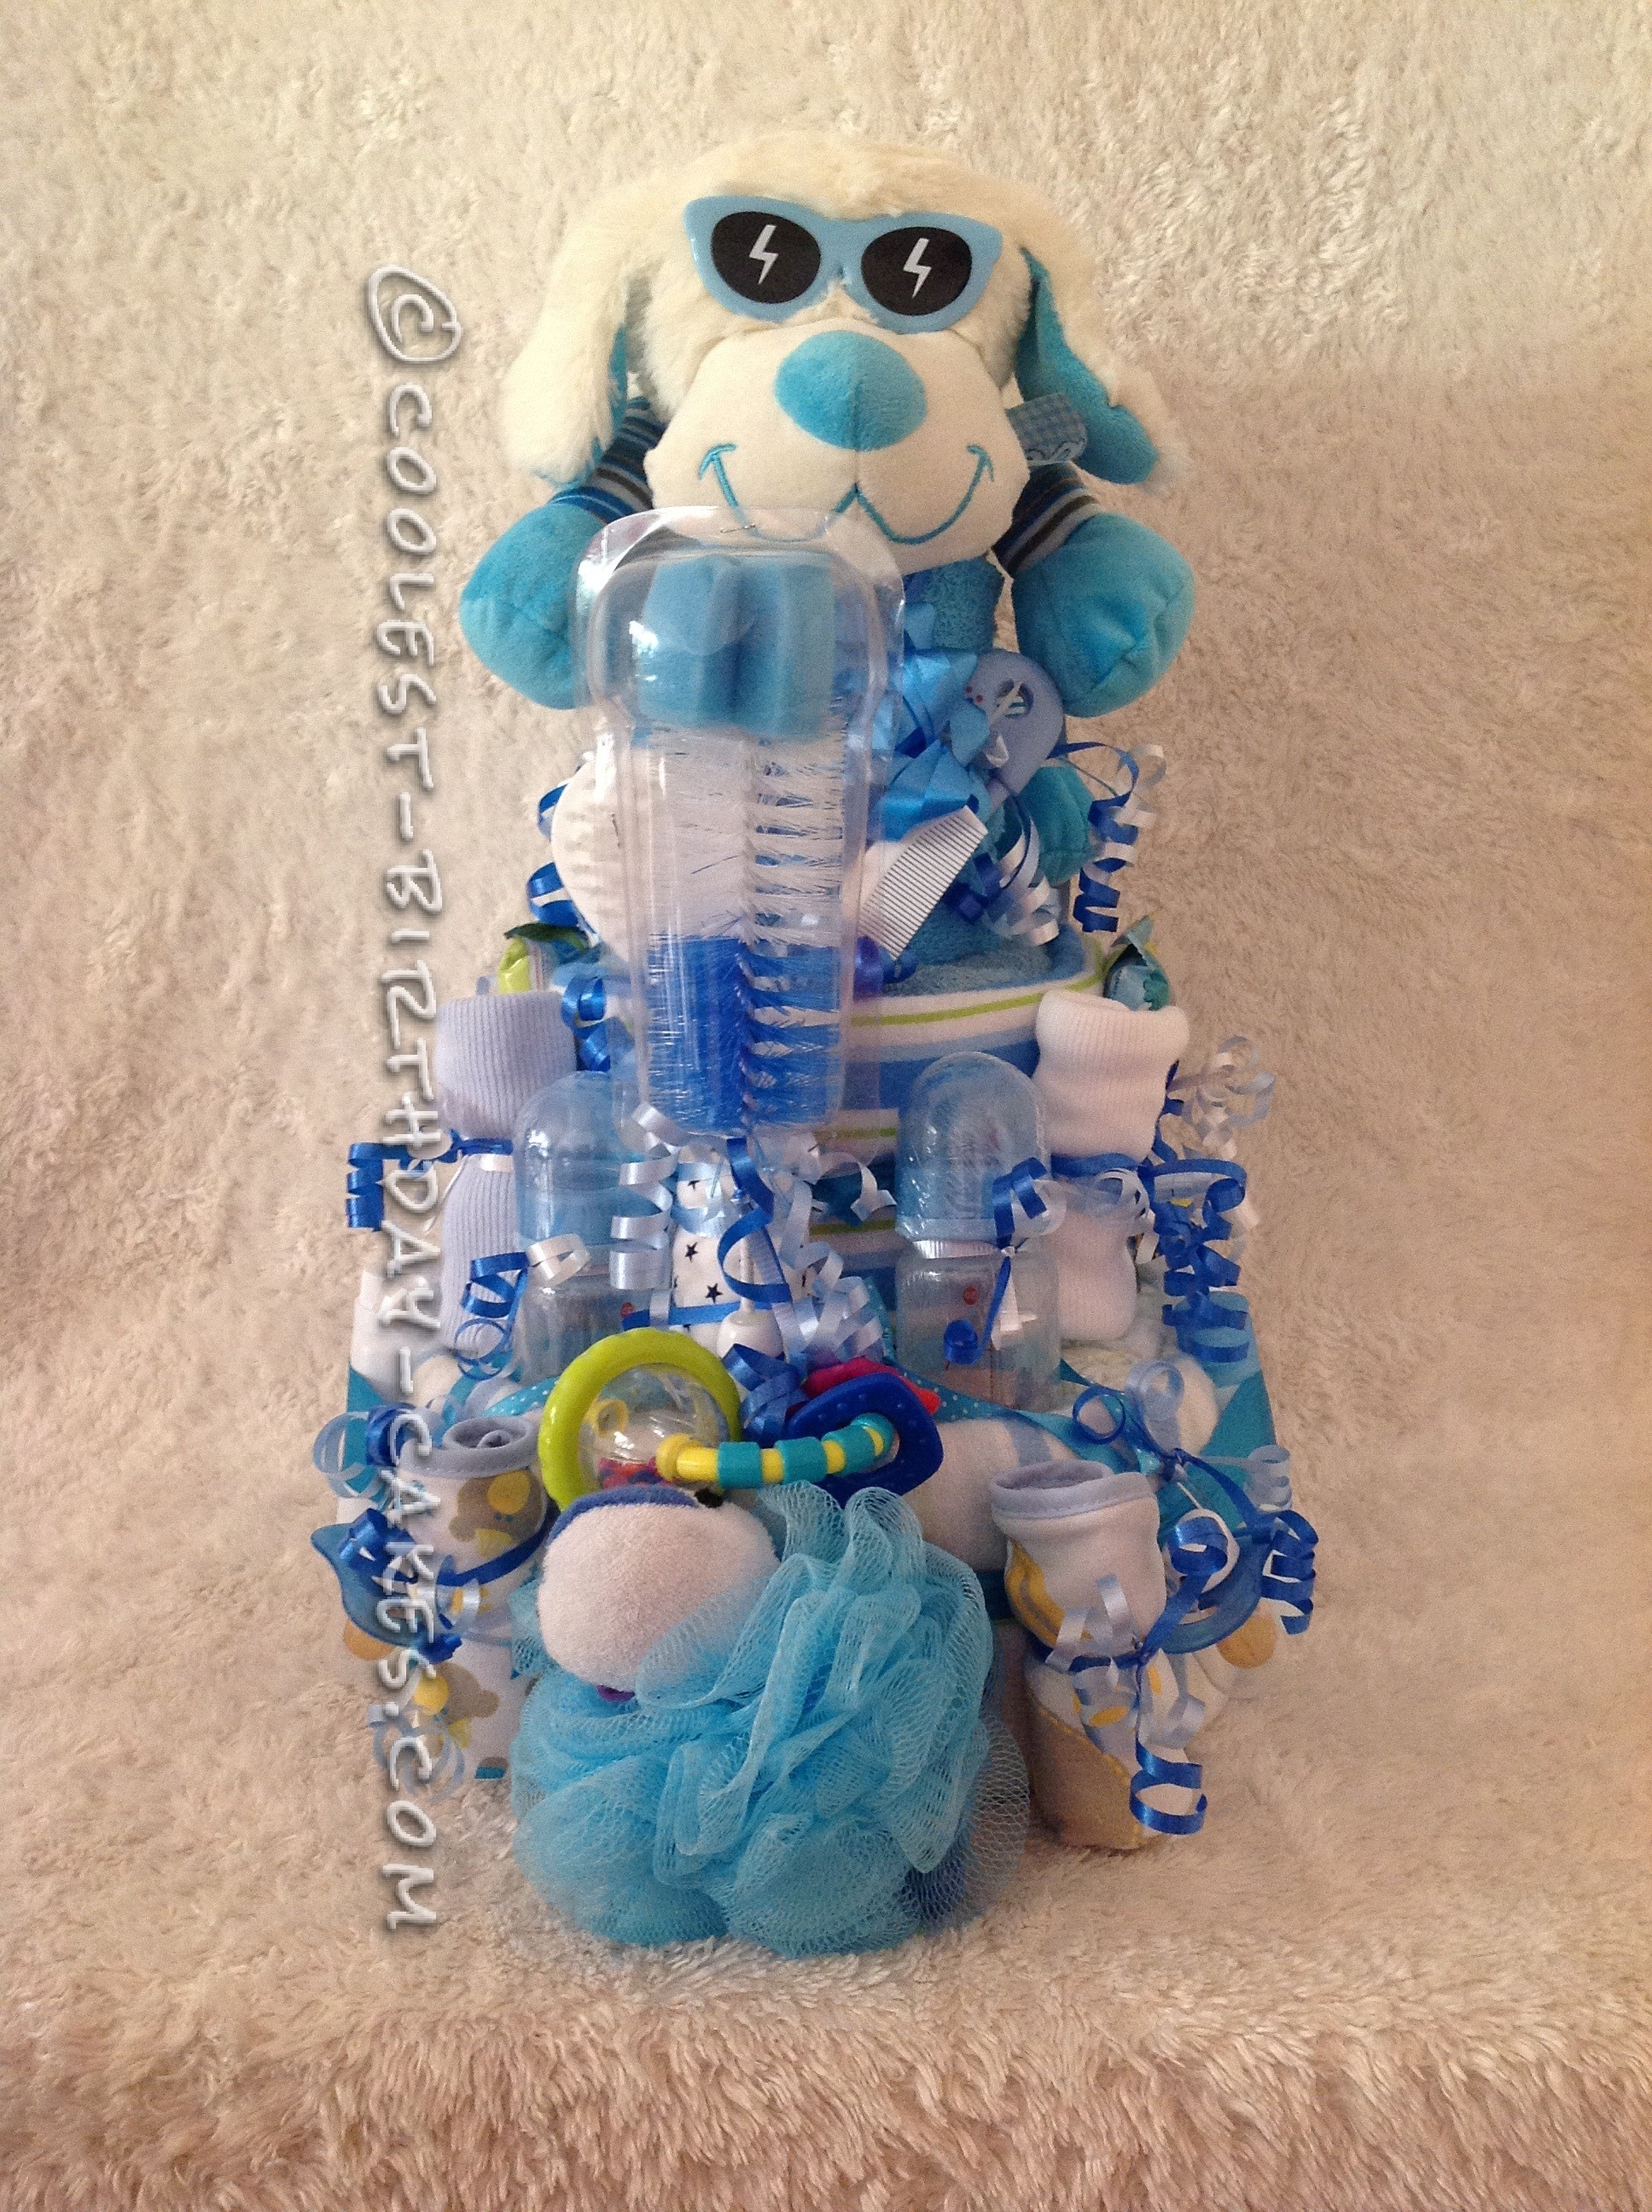 Coolest Nappy Cake